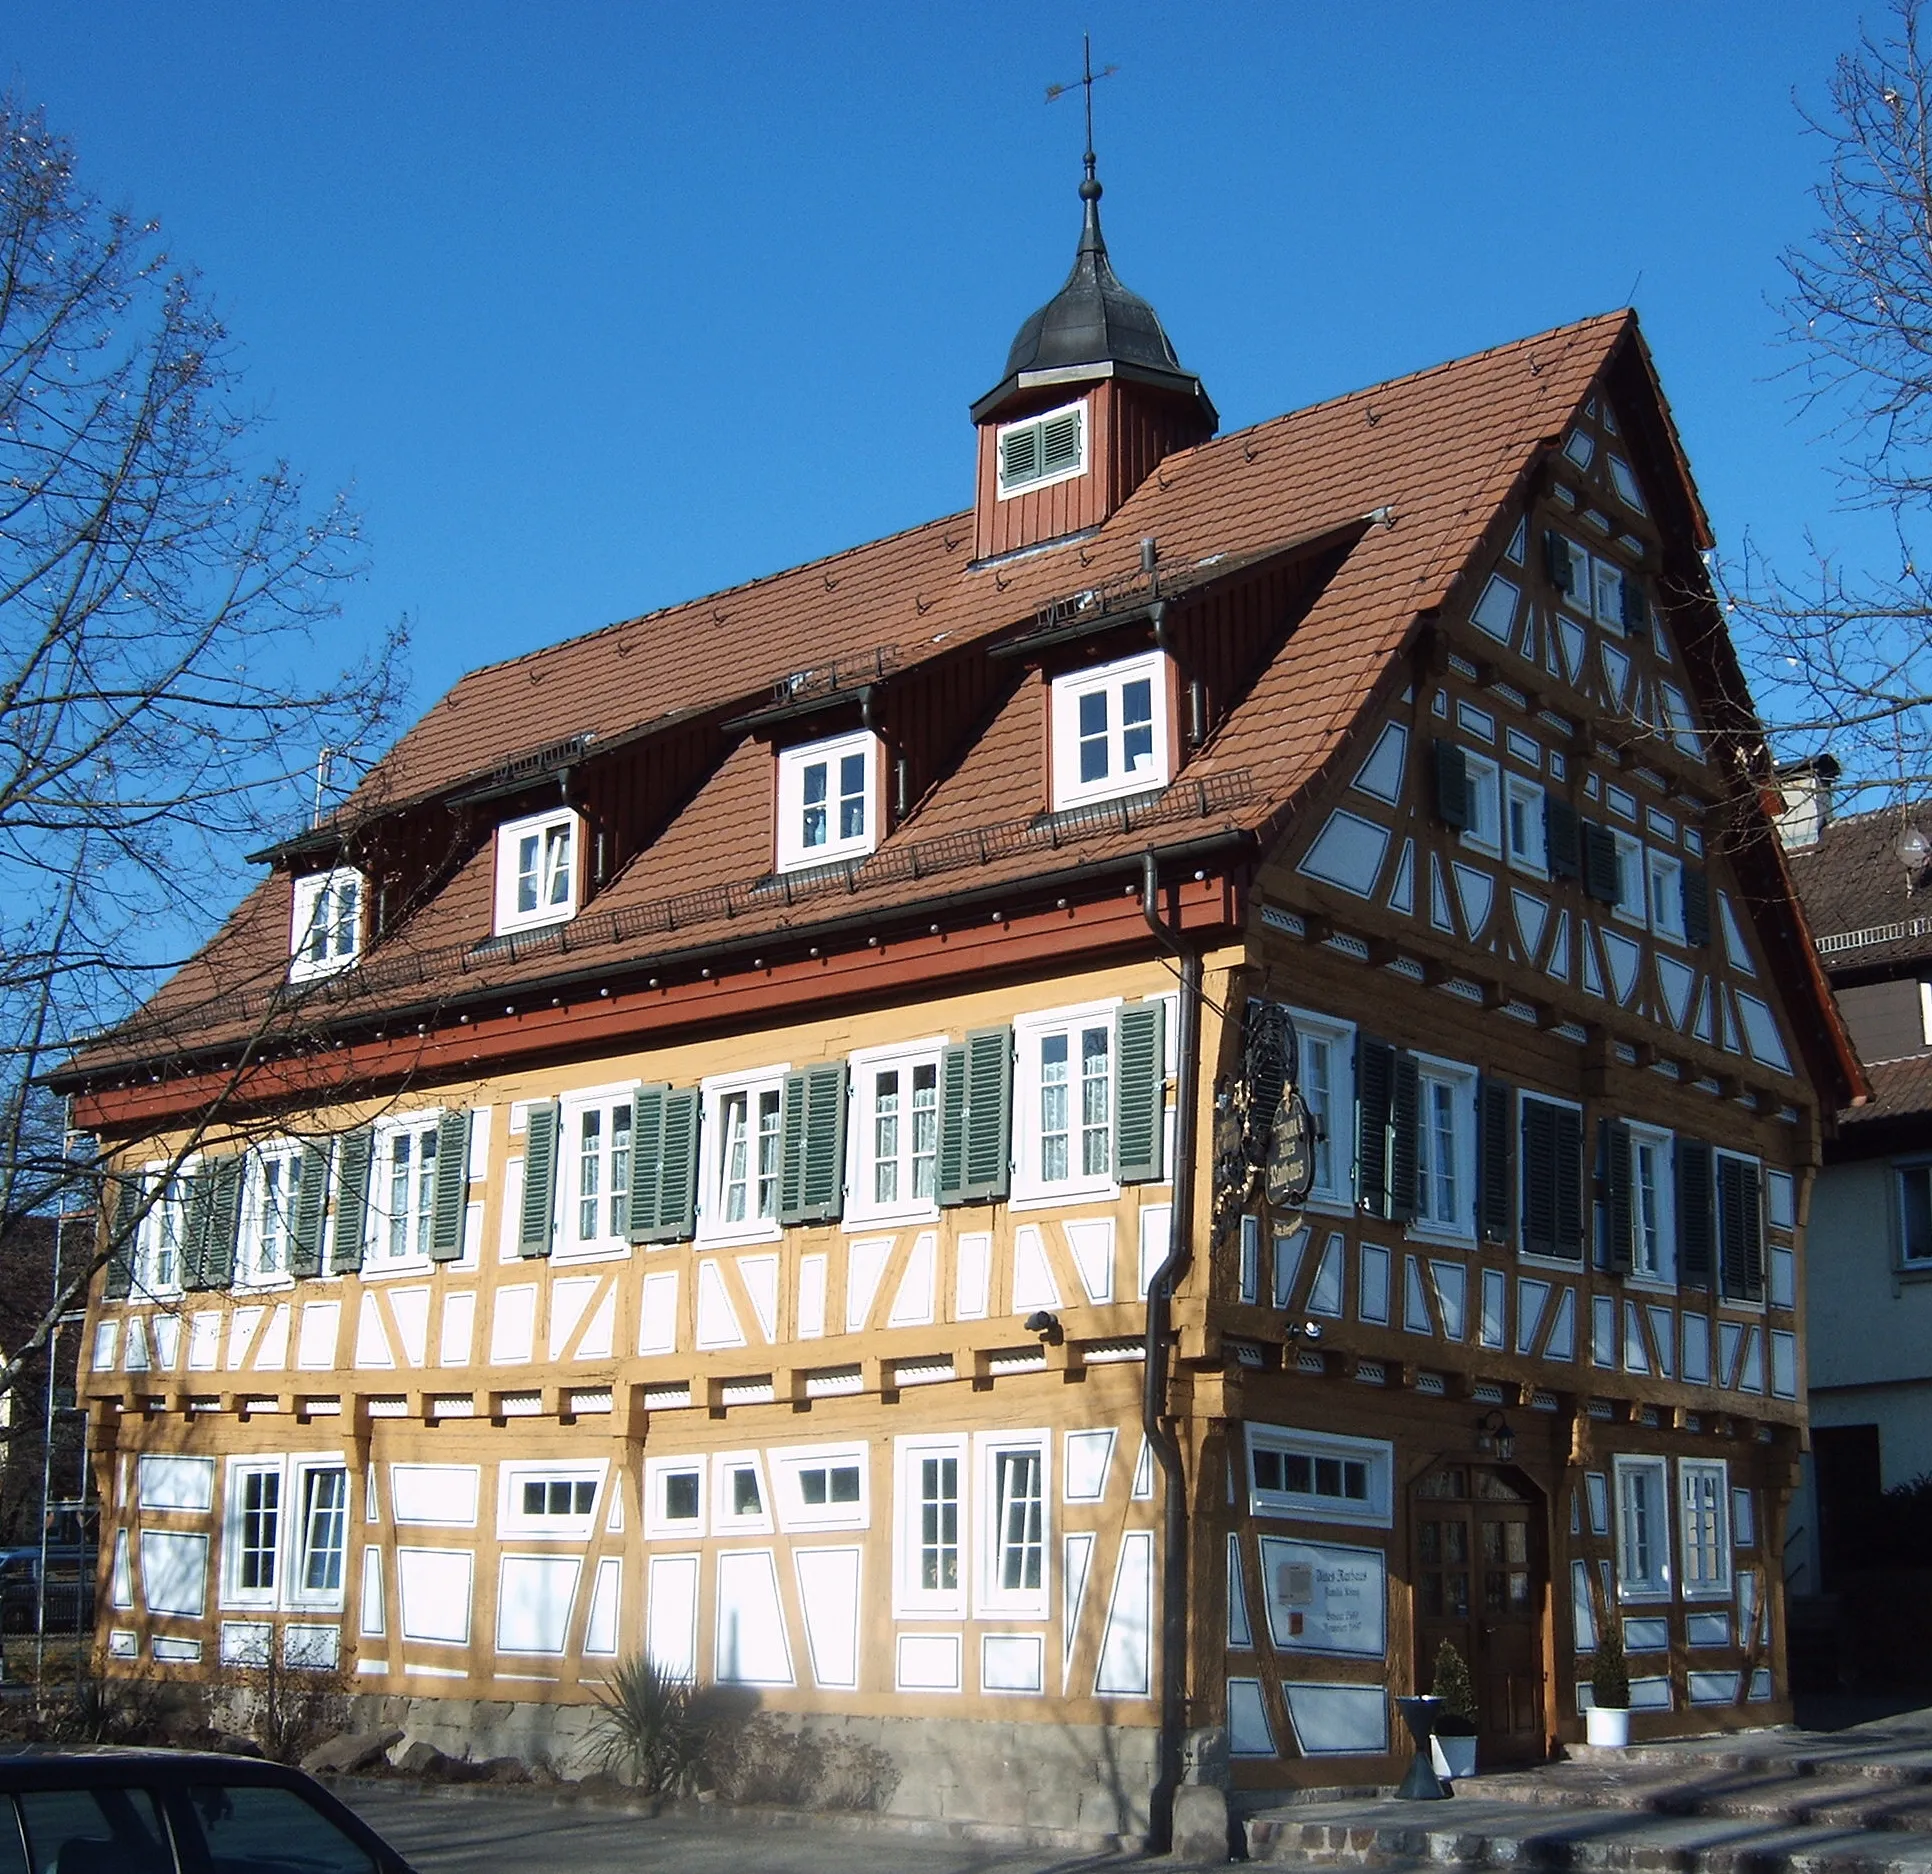 Photo showing: Old town hall in Plüderhausen, Germany, built in 1569